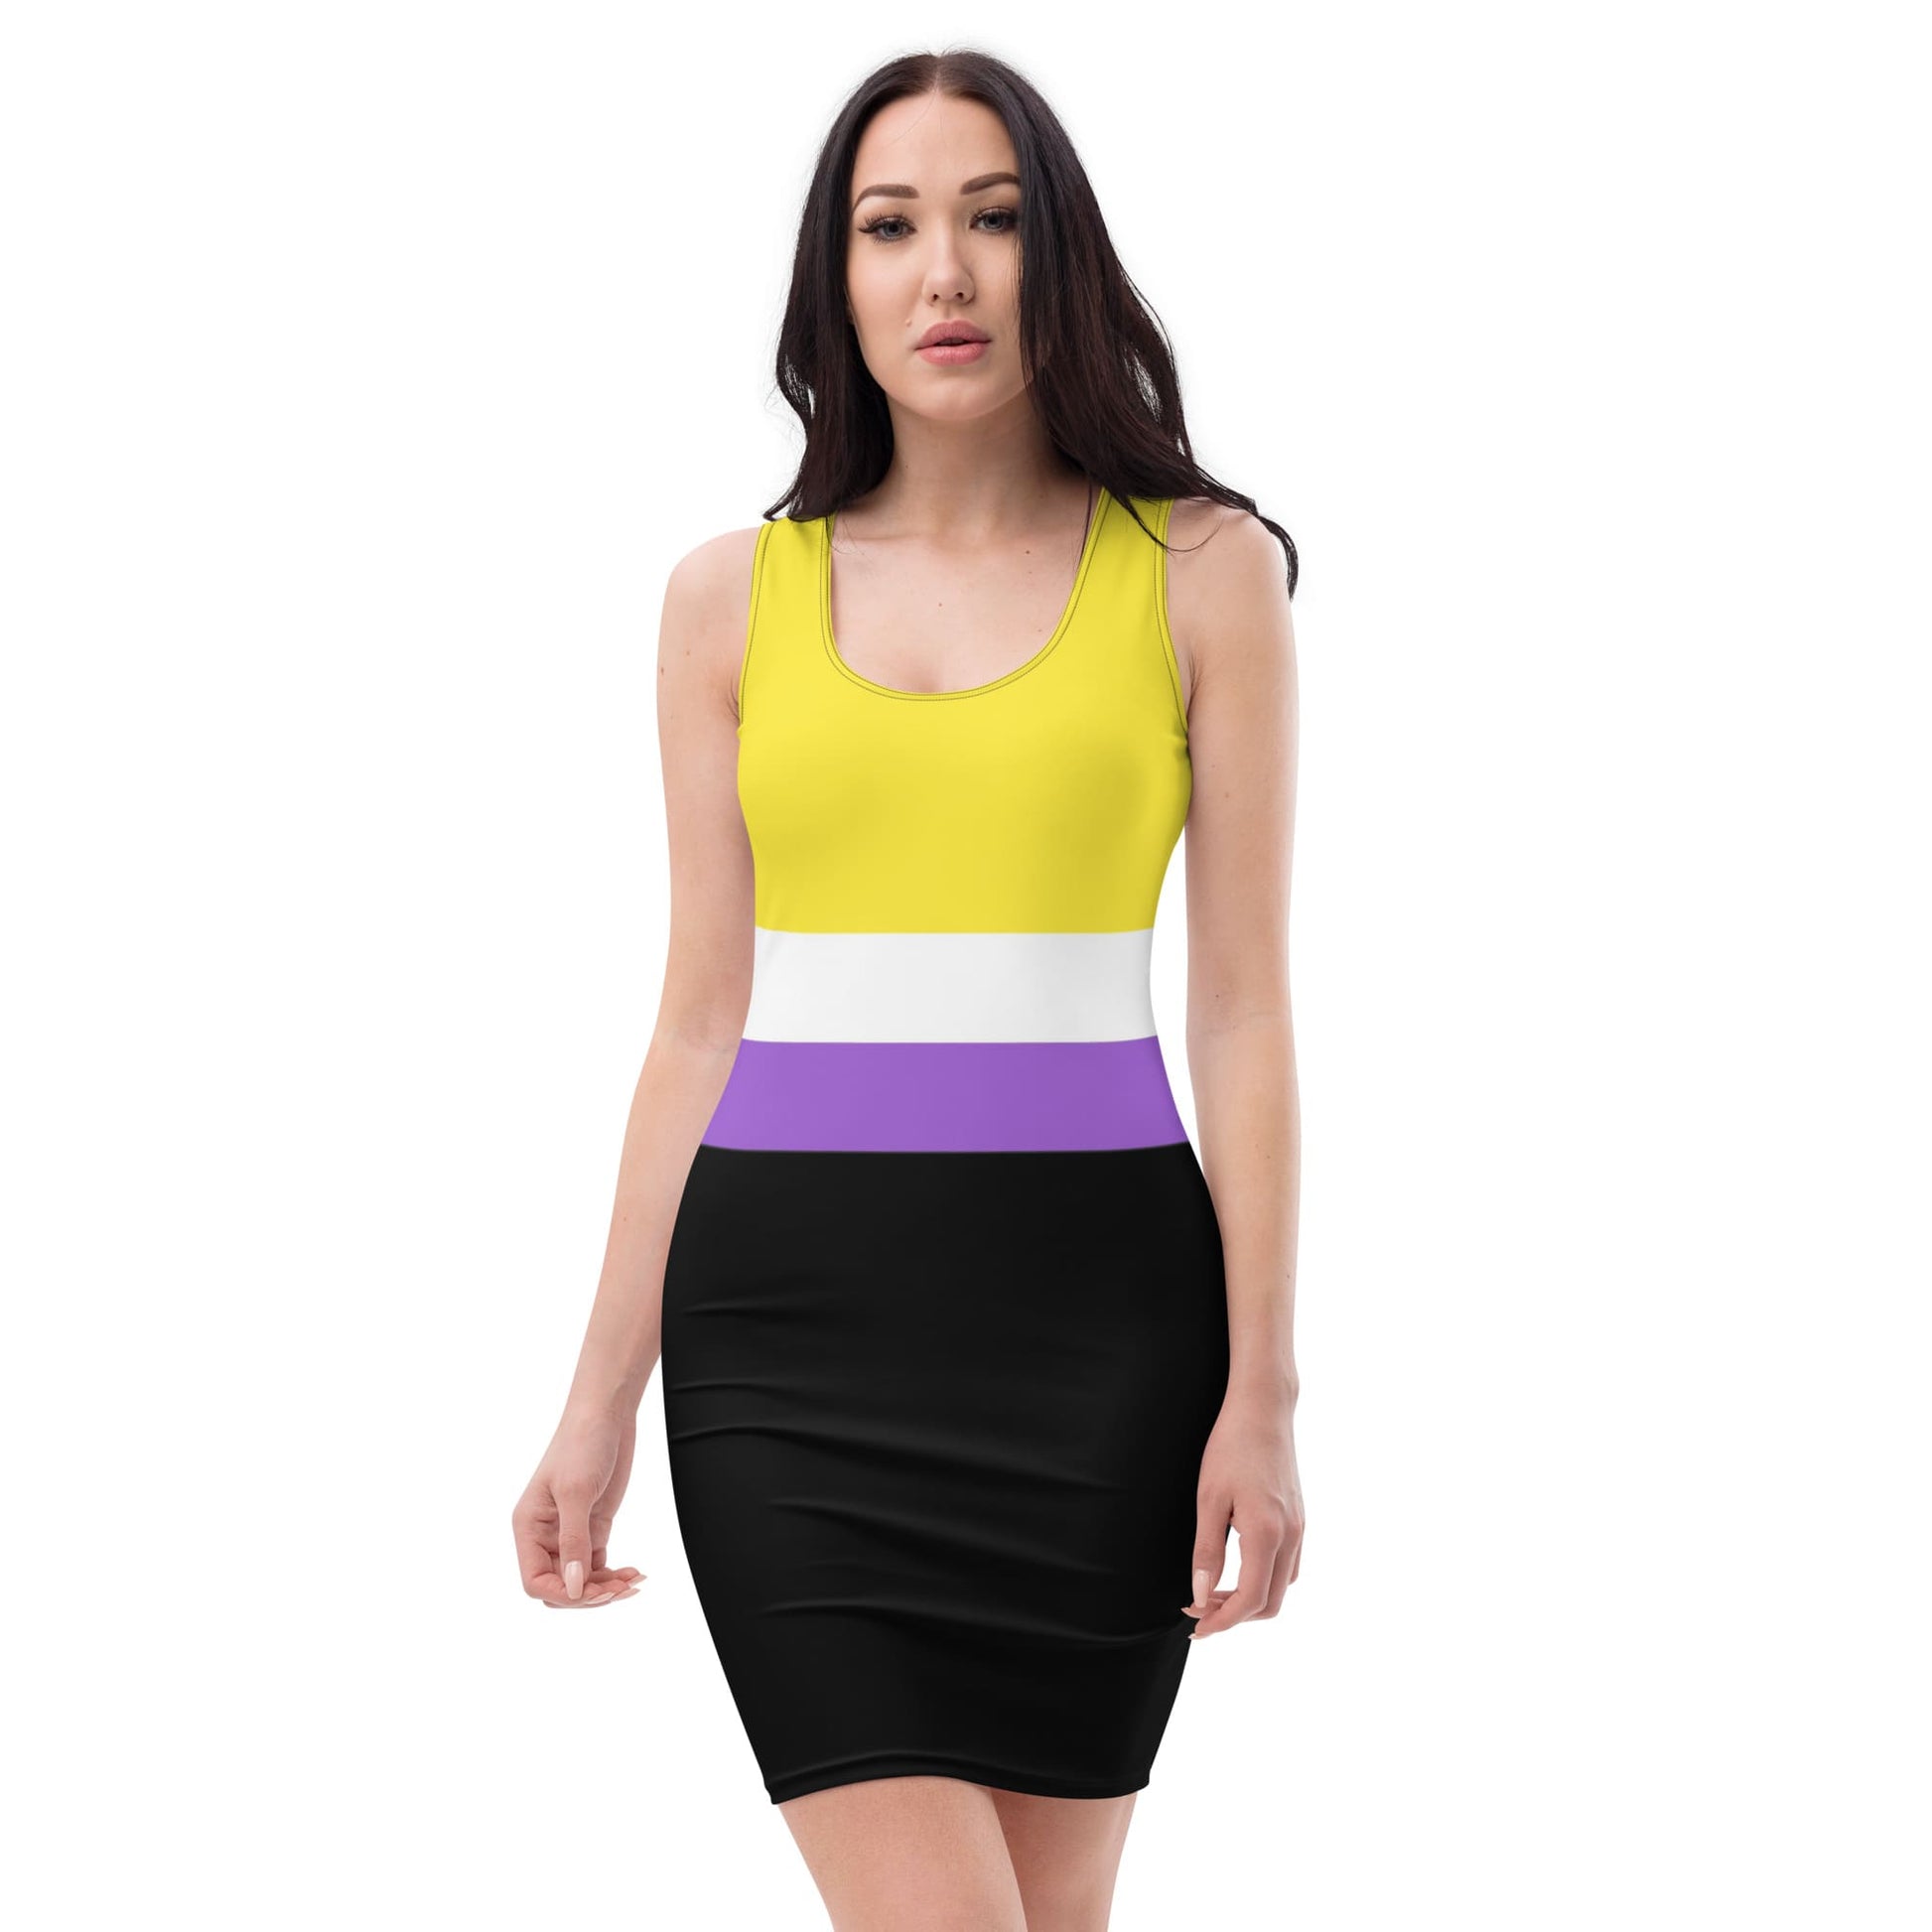 nonbinary dress, front